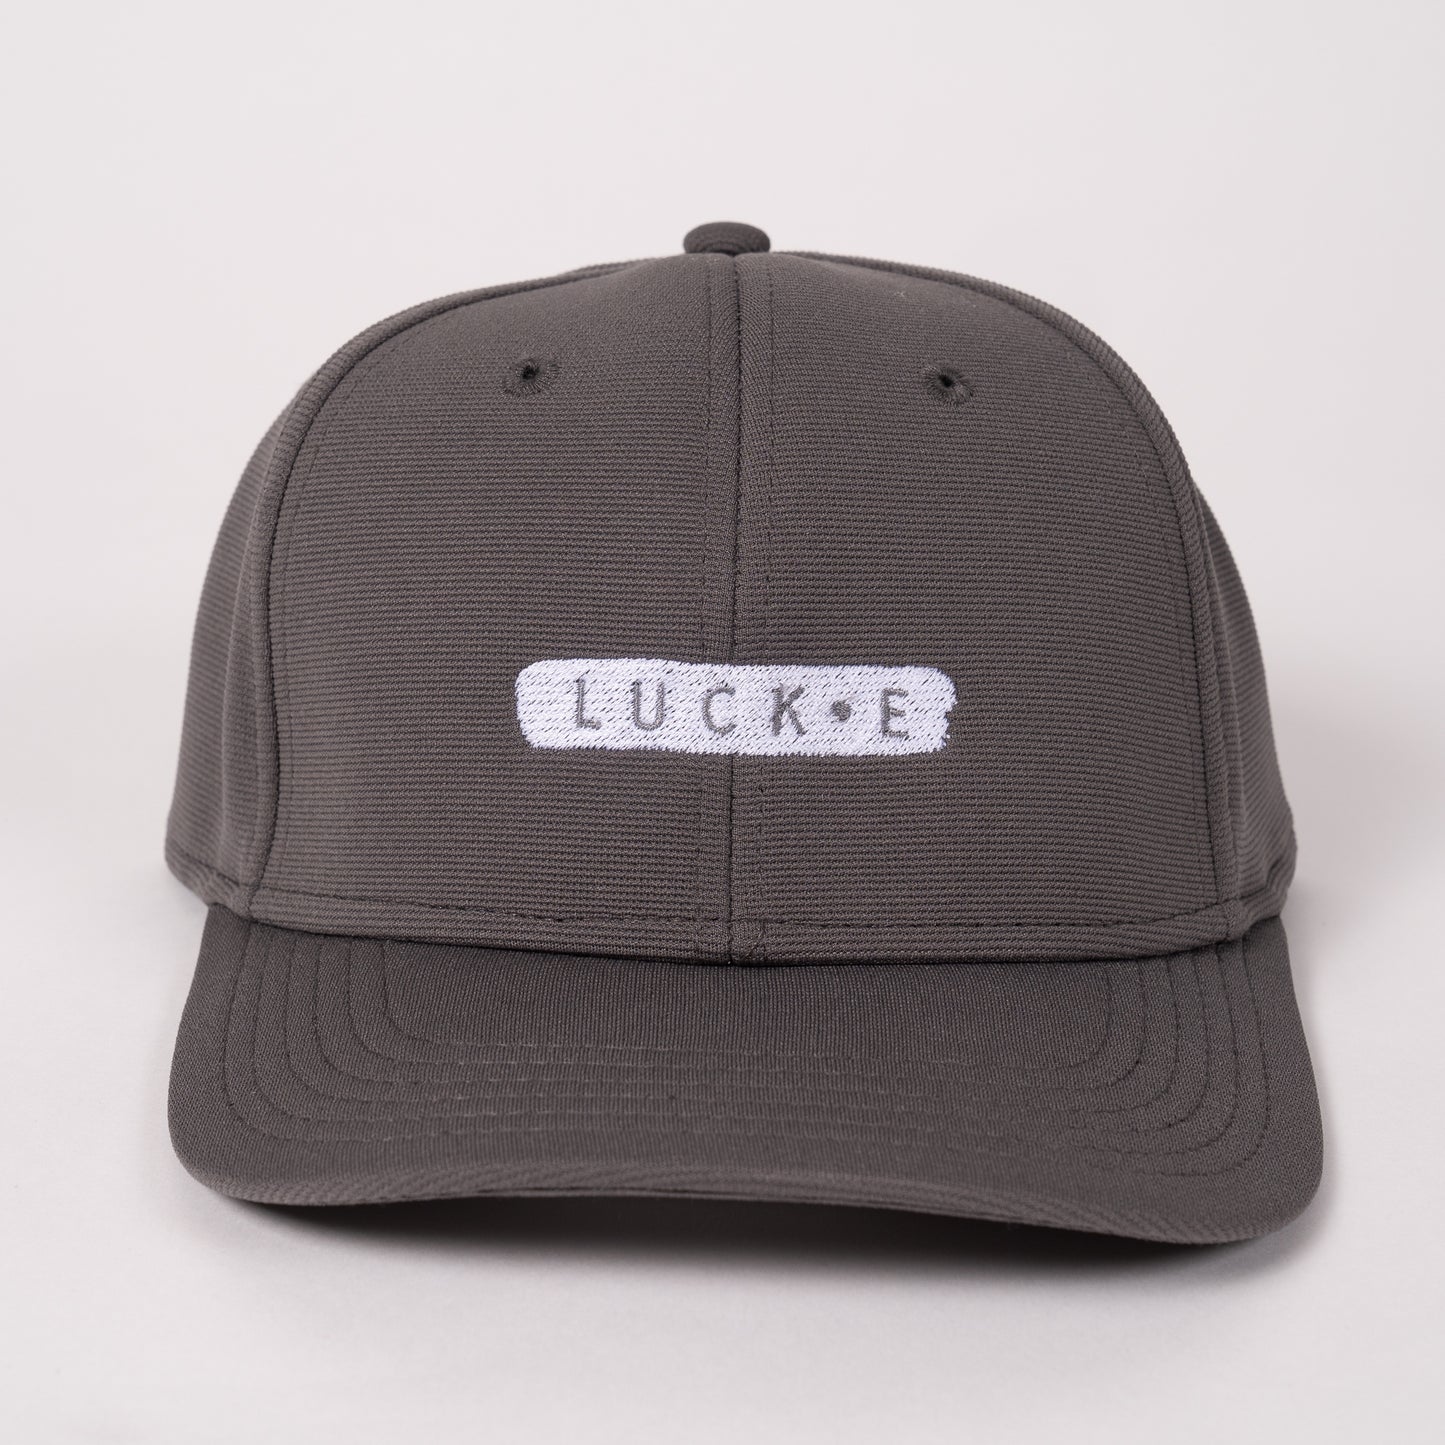 The One Cap | Super Comfortable | Recycled Plastic Bottles LUCK•E